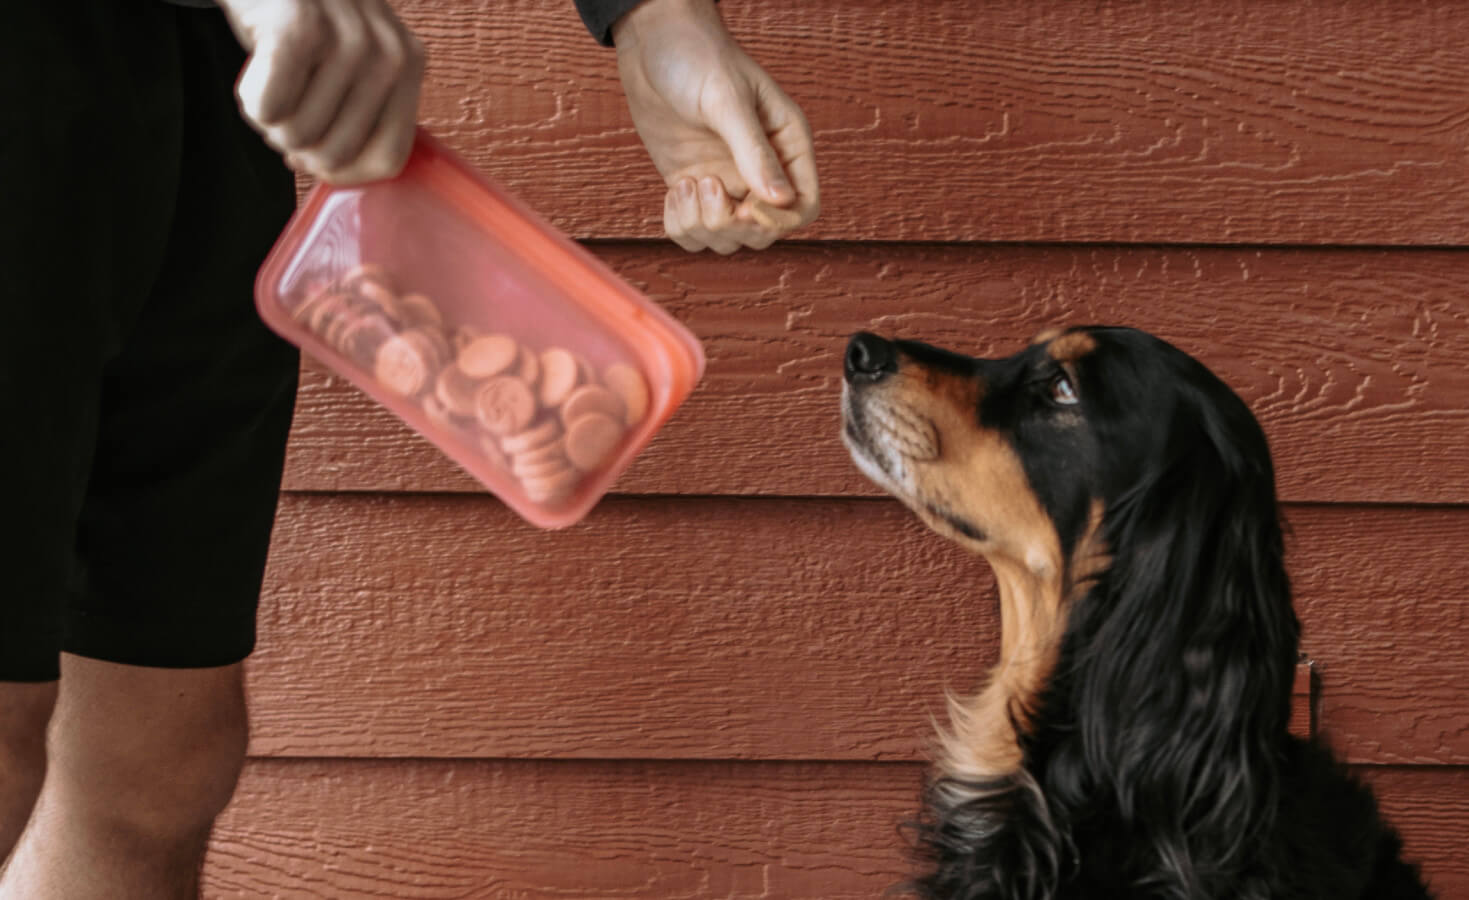 A human holds a pink Stasher bag full of dog treats and hands his dog one of the treats